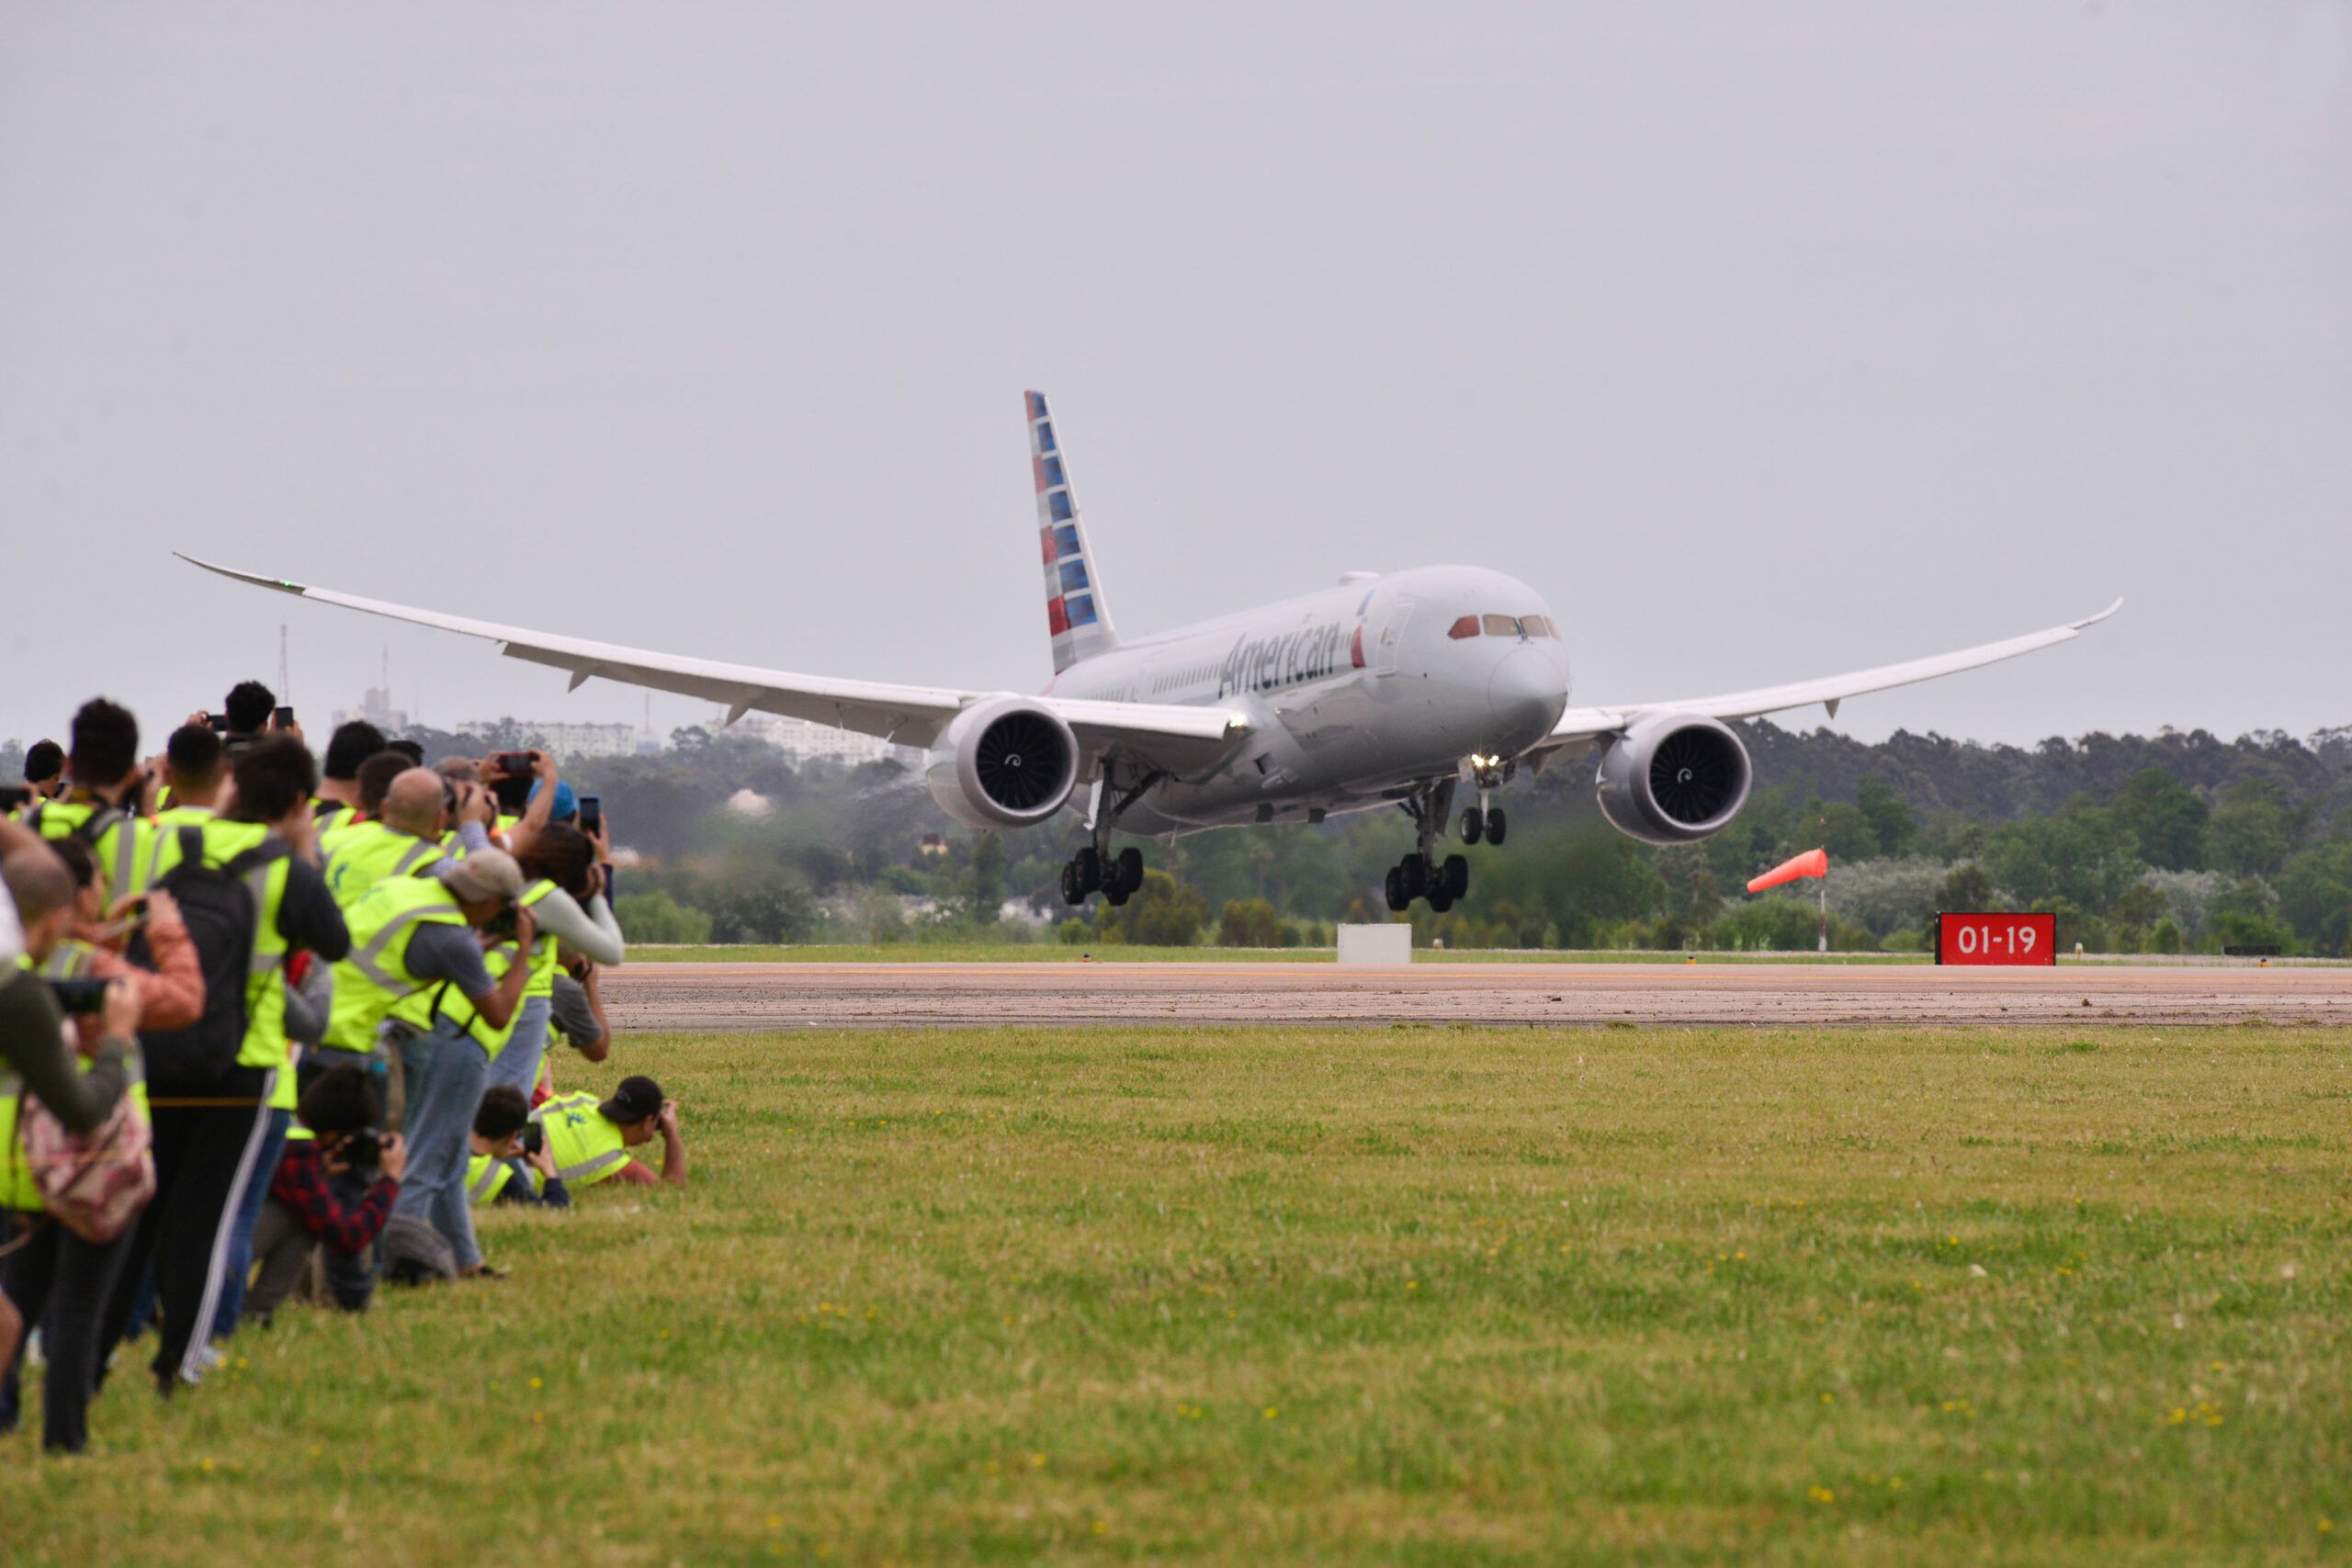 AeroFotoFest-2-scaled - American Airlines Boeing 787 on flight ops in front of photographers